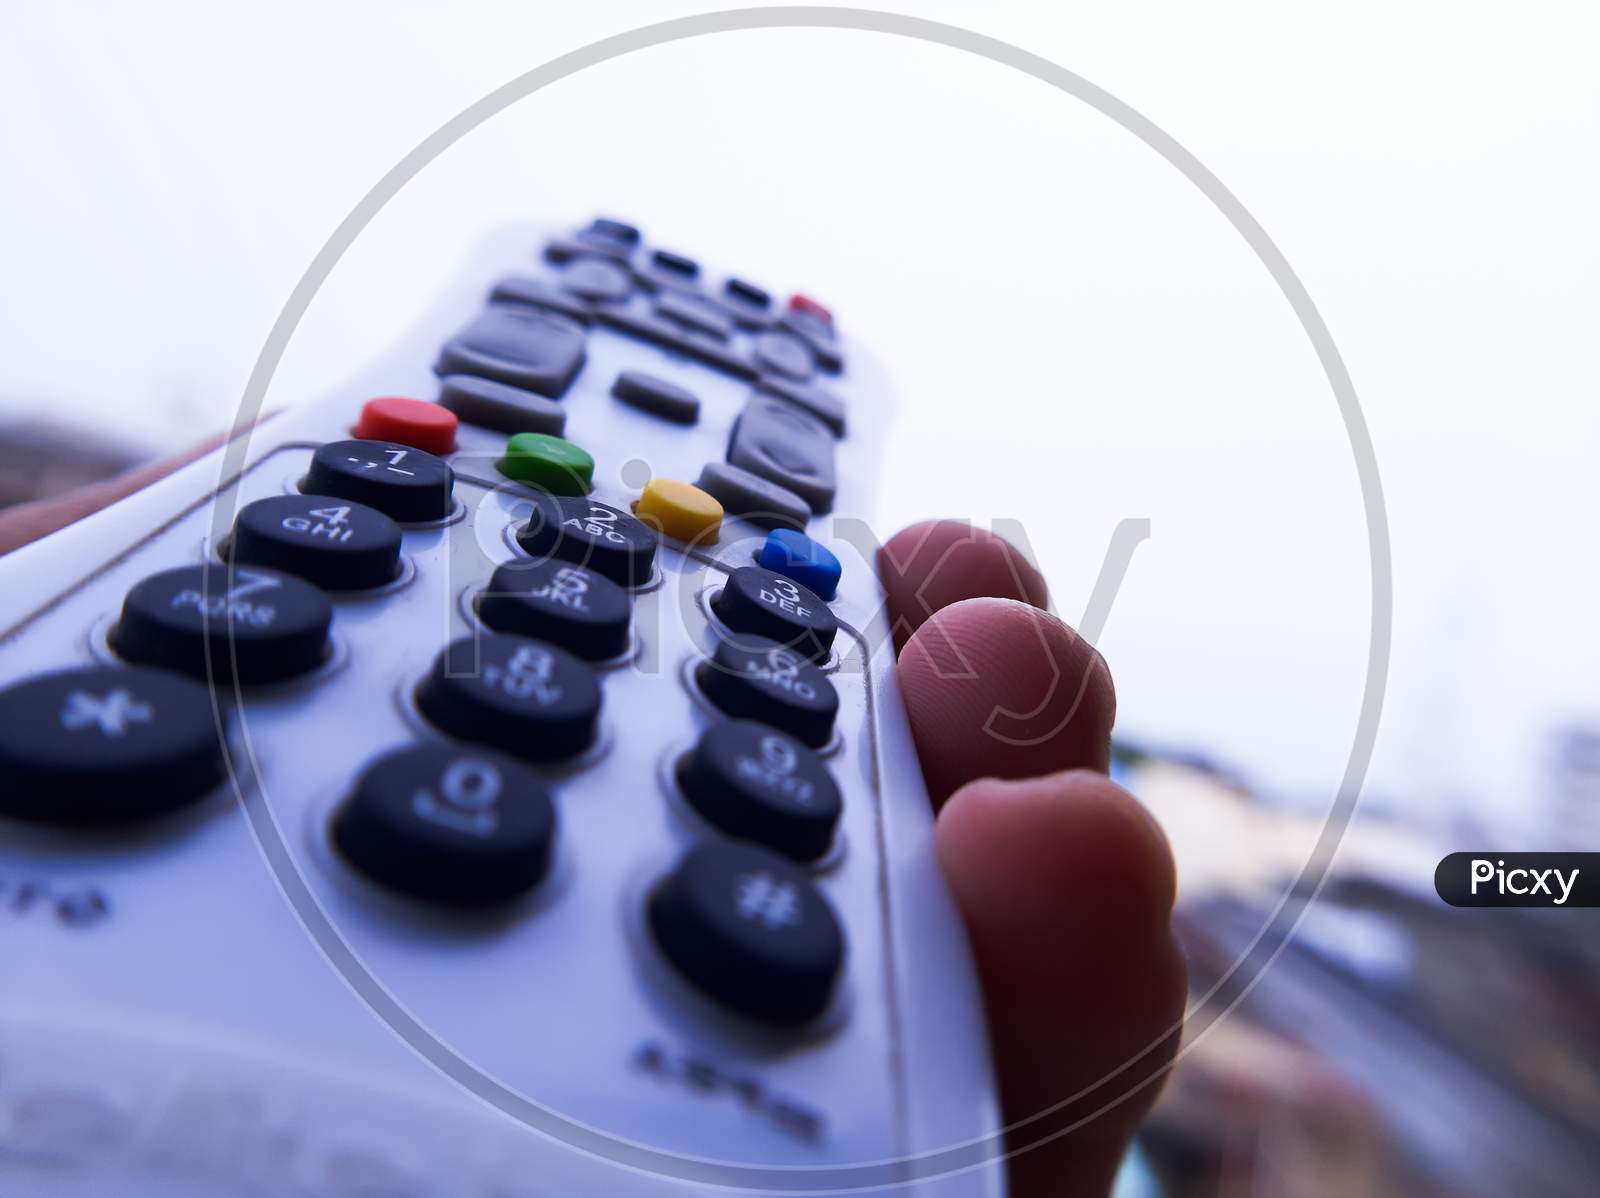 A remote control of a television clicked with macro lens